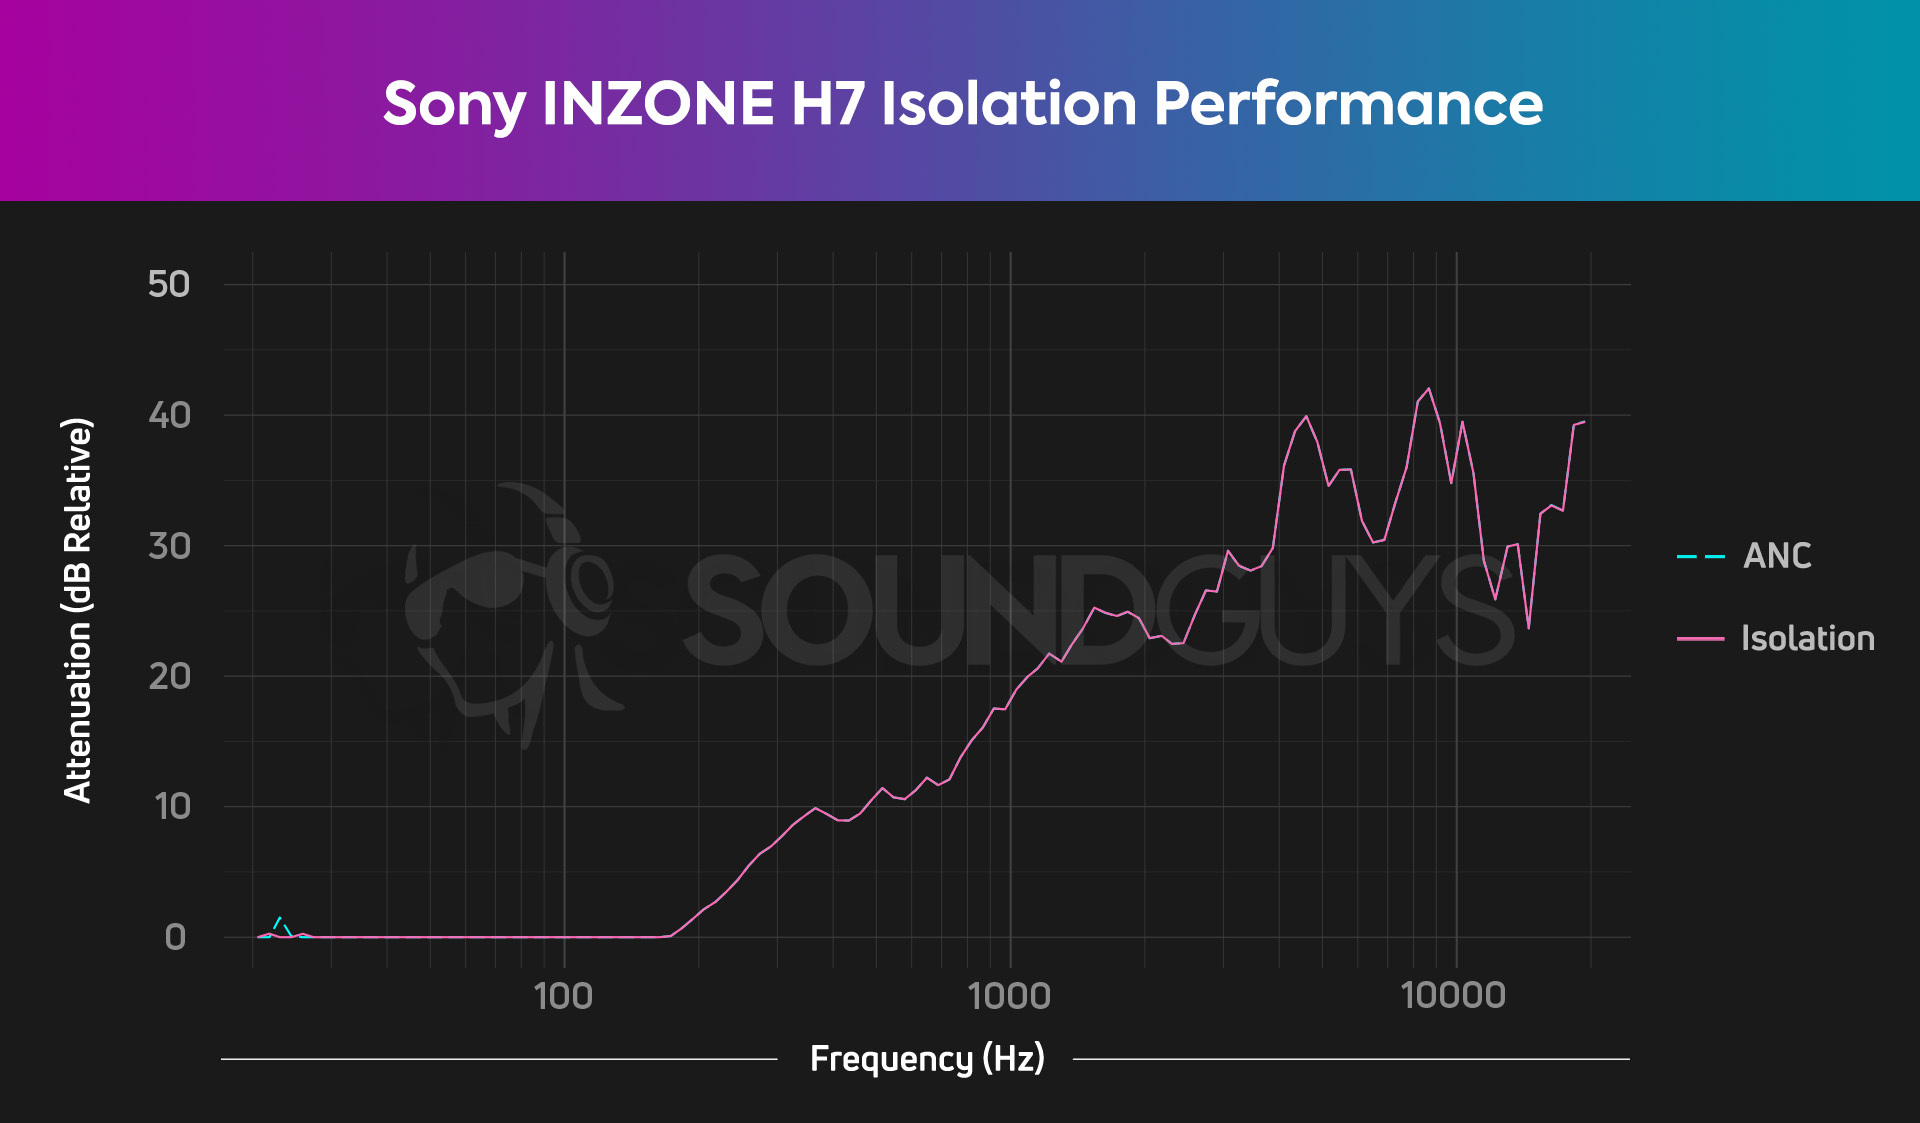 The Sony INZONE H7 isolation performance chart, showing it being reasonably effective at blocking out high end noise.